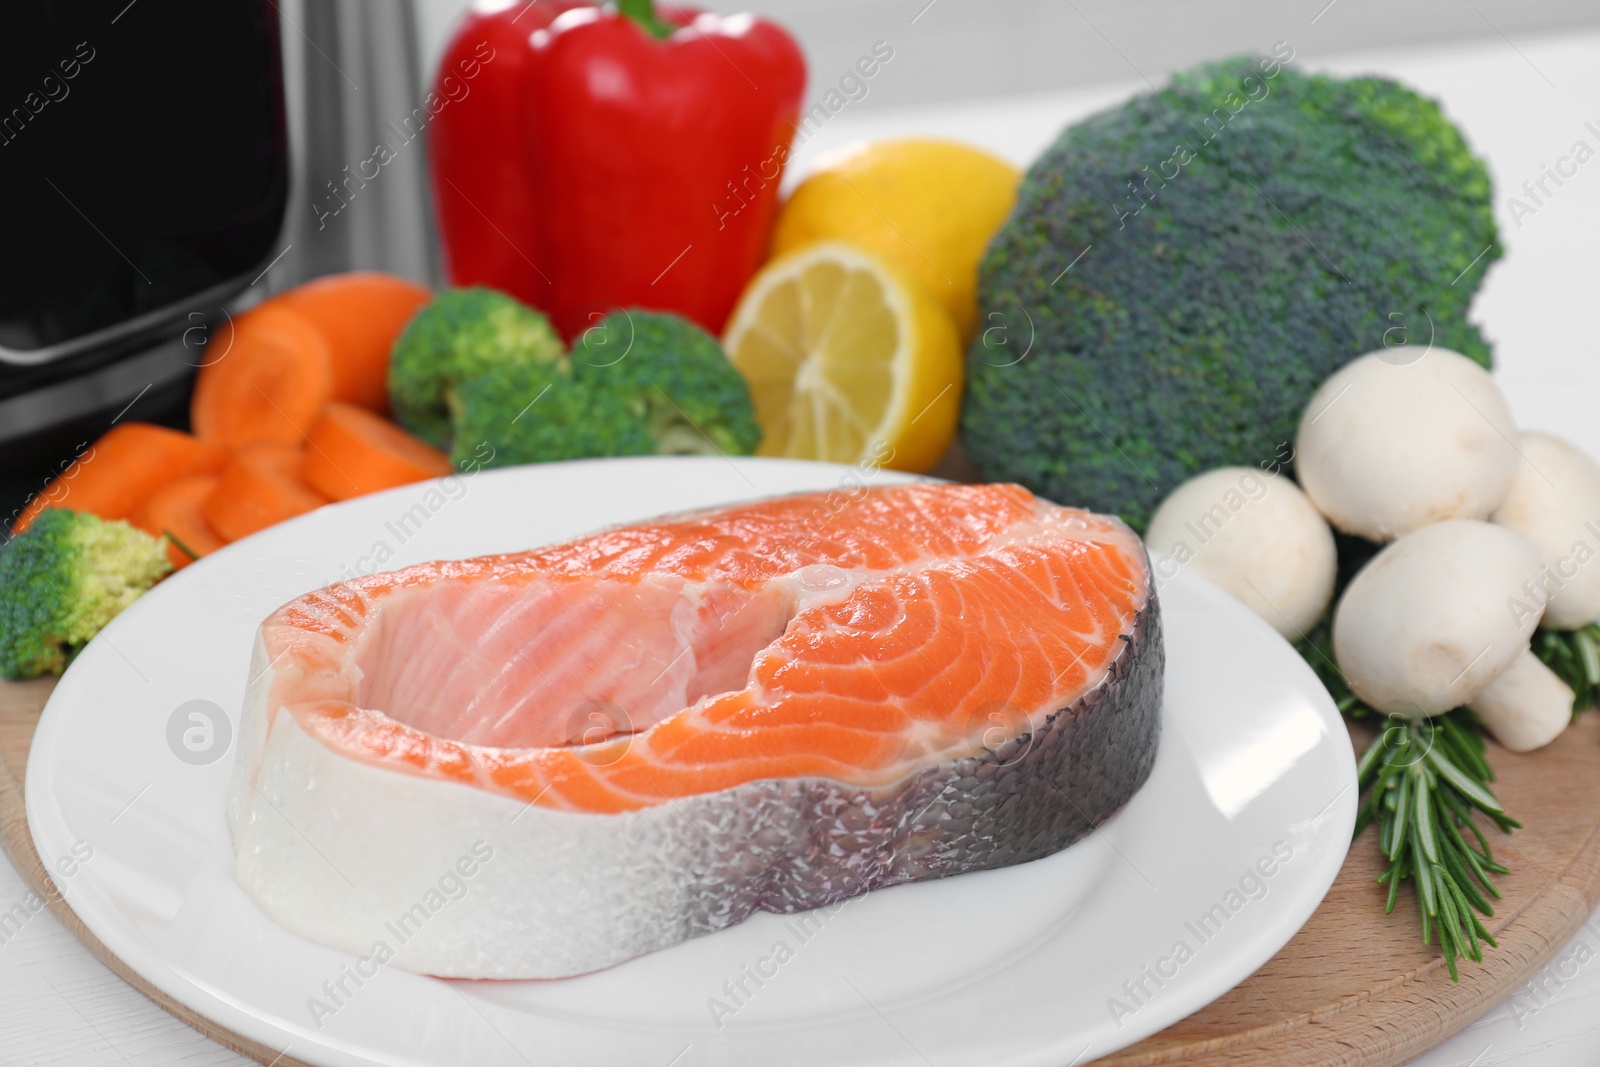 Photo of Raw salmon steak and vegetables near multi cooker on table, closeup